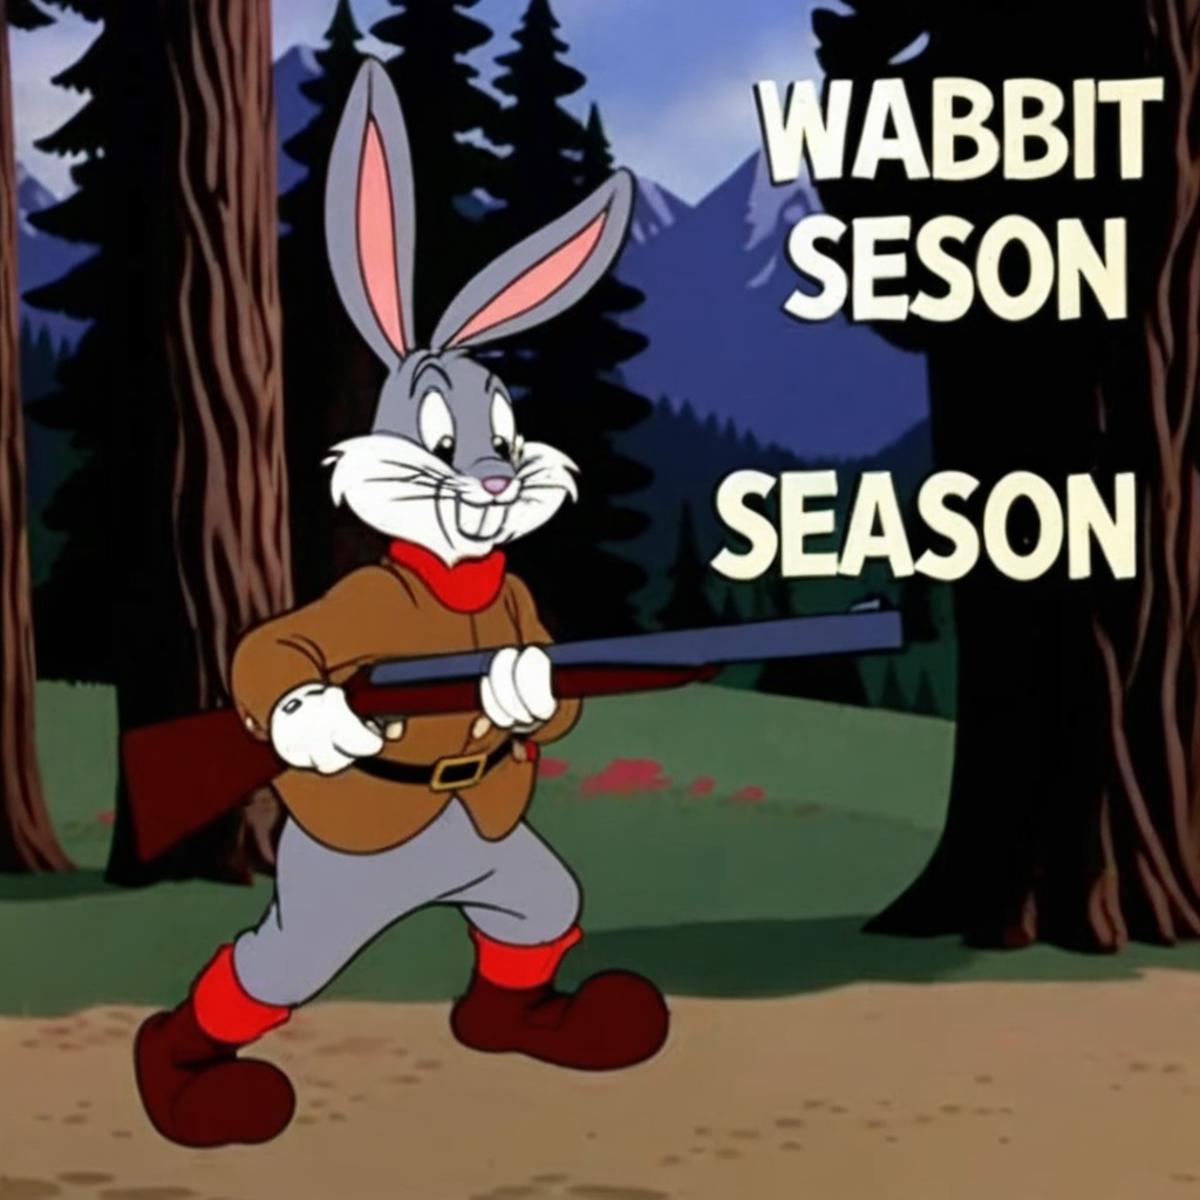 Elmer Fudd Wascally Wabbit Experience image by 3VOLUTION